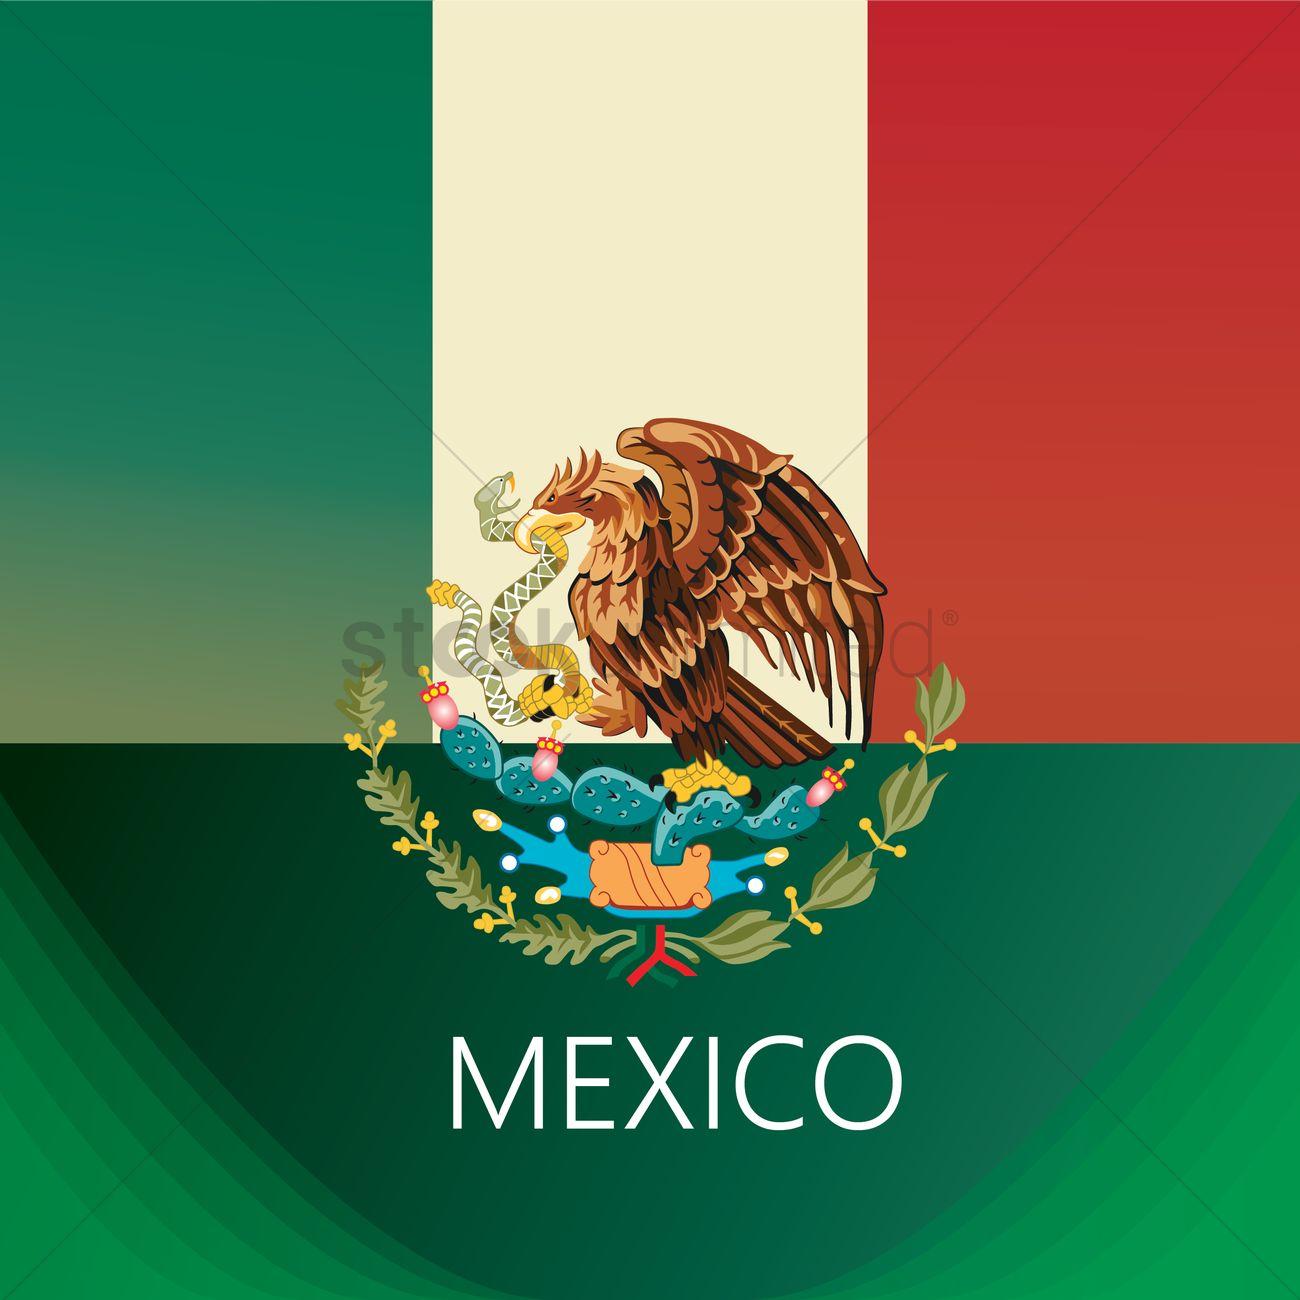 Mexican Flag Background 27 Kb: 1300x1300